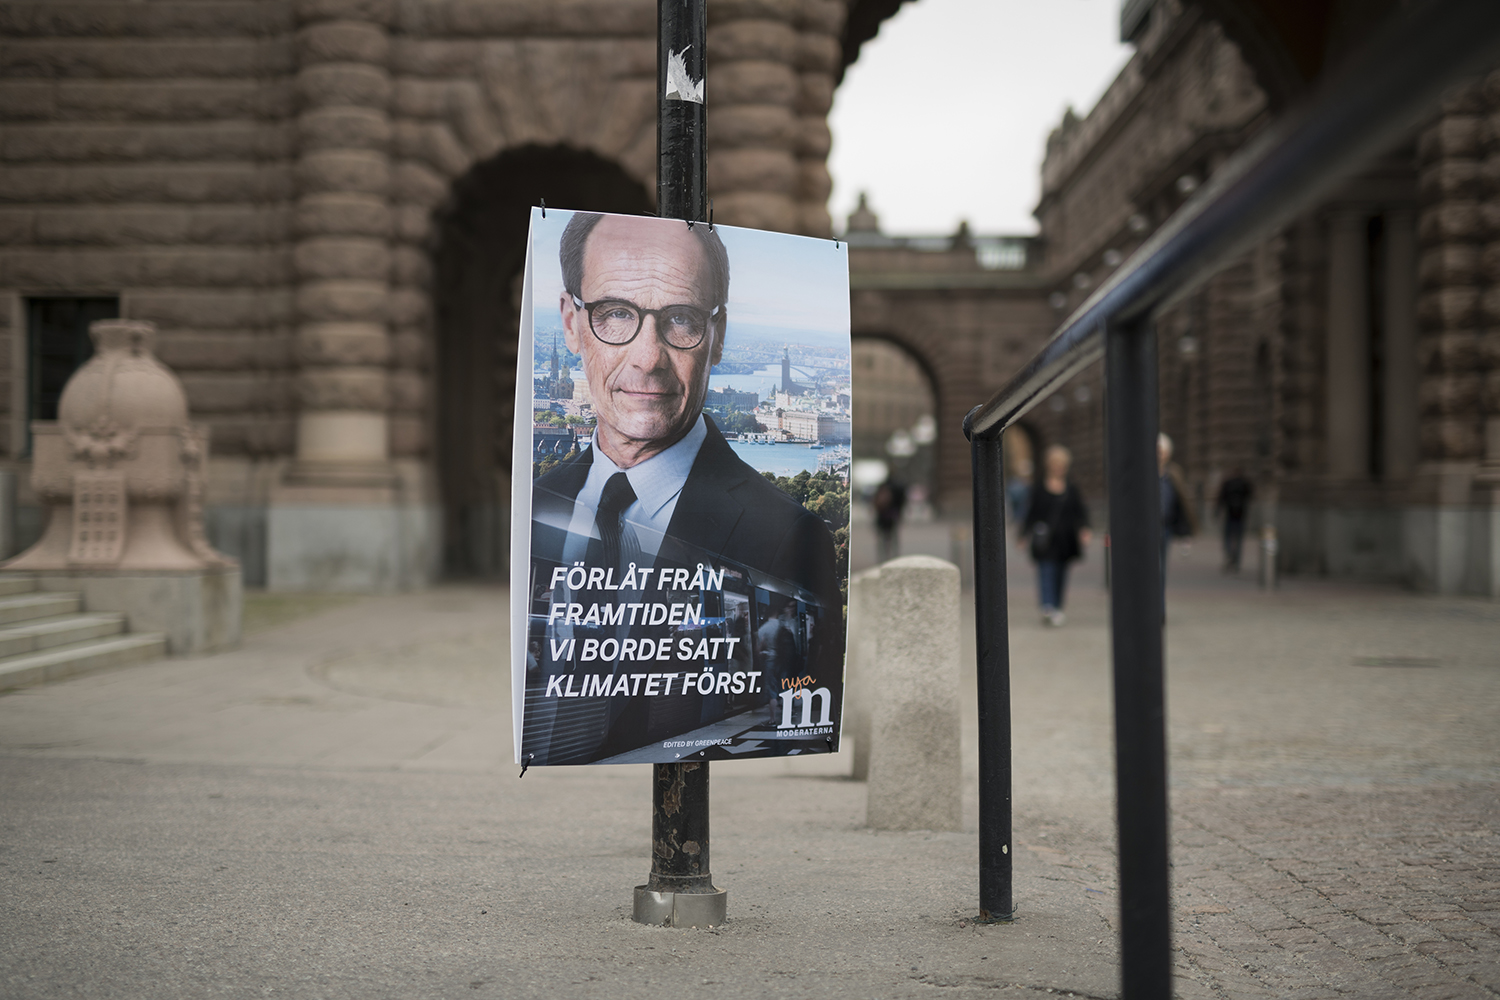 Art direction and manipulation of images for fake election posters of the eight parliamentary parties in Sweden before the election in September 2018. The party leaders where made to look older and apologised from the future, that they didn't act earlier with the climate issues before it was too late. The images were printed as usual election posters and deployed in Stockholm the week before the election.